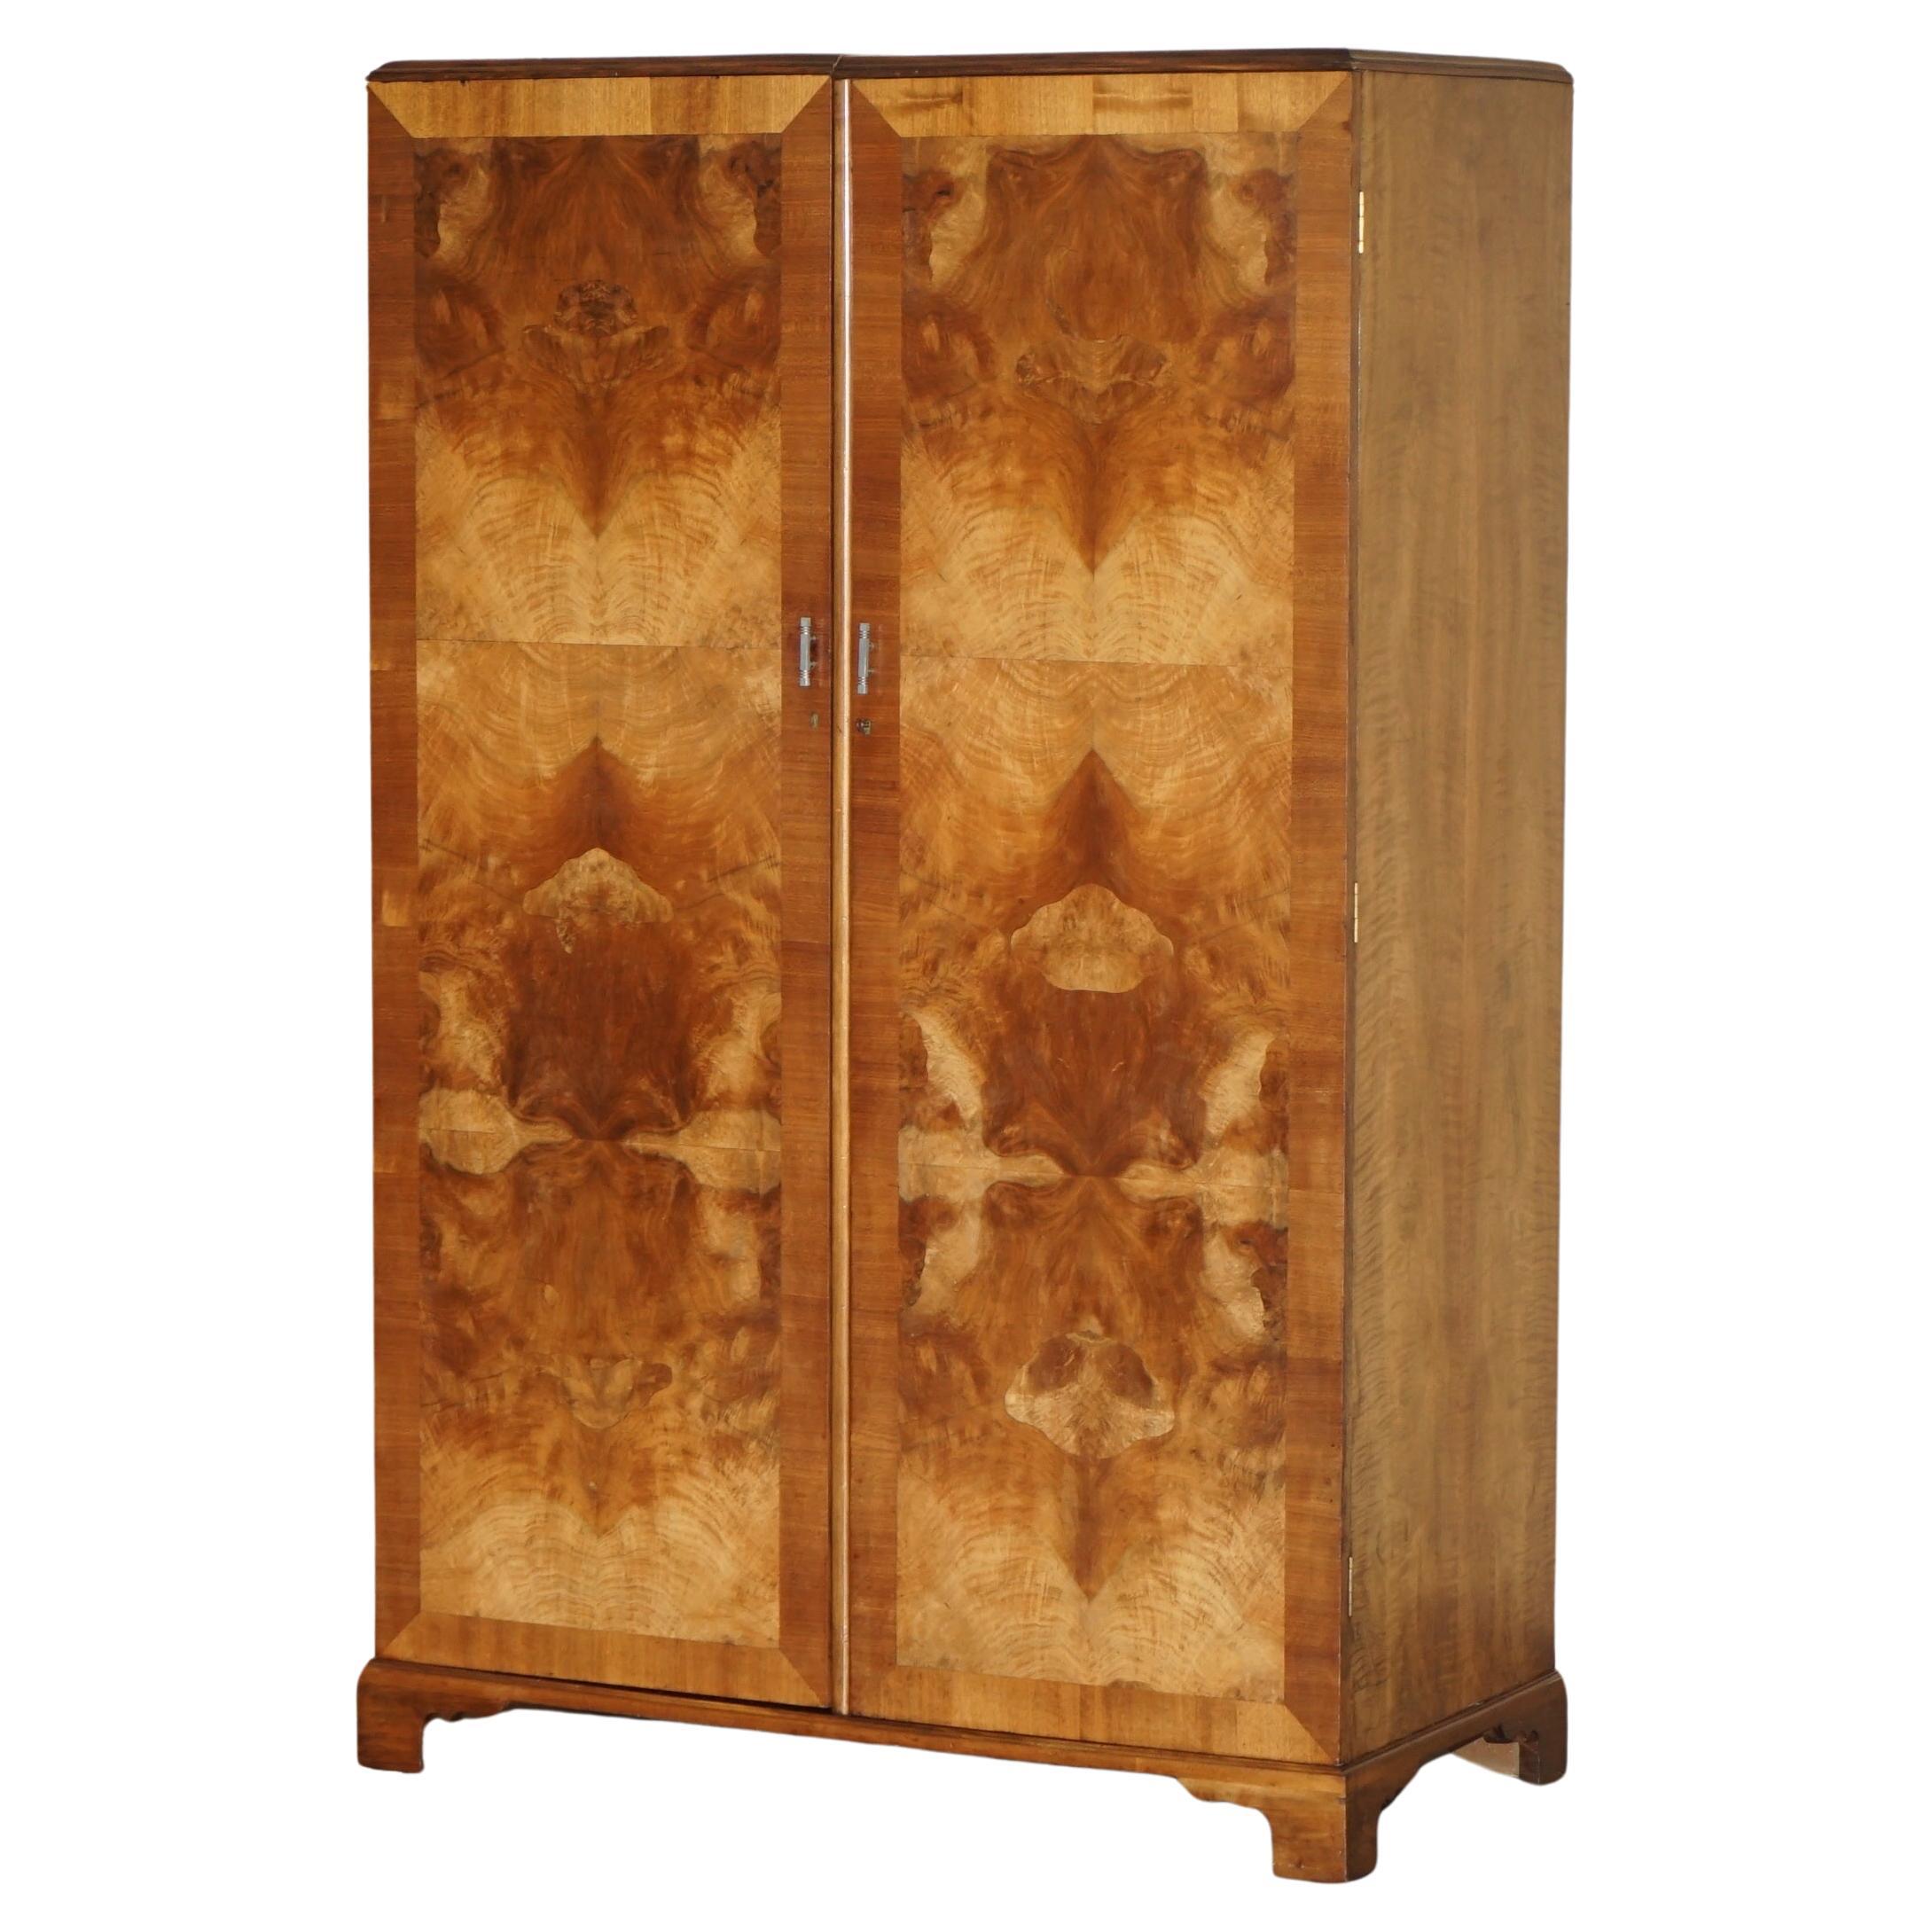 Royal House Antiques

Royal House Antiques is delighted to offer for sale this stunning, original circa 1900-1920 Burr Walnut free standing wardrobe with Military Campaign Chest of drawers built inside 

Please note the delivery fee listed is just a